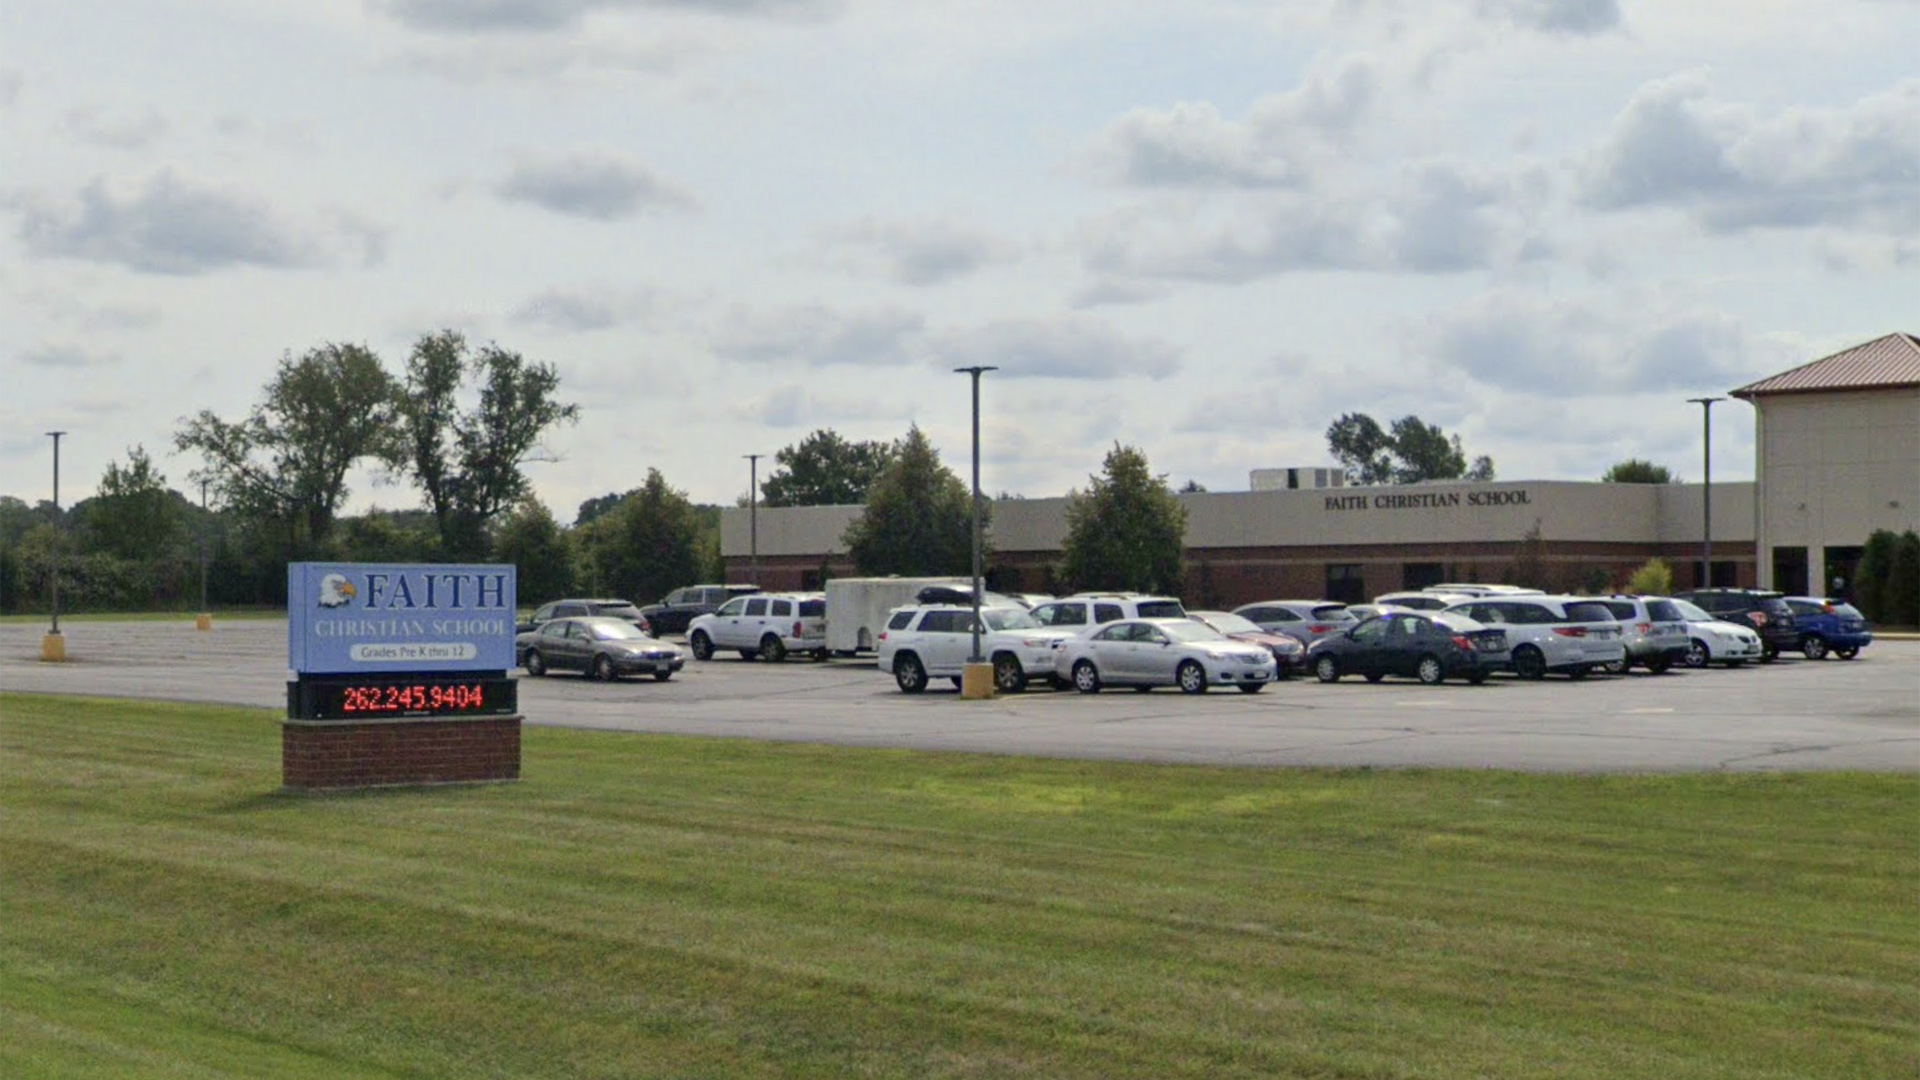 A Google Maps photo shows more than a dozen vehicles parked in a lot in front of a building with a sign reading "Faith Christian School," with a mown lawn in the foreground and another sign with the name "Faith Christian School" alongside an illustration of a bald eagle's head and a digital display showing a phone number.